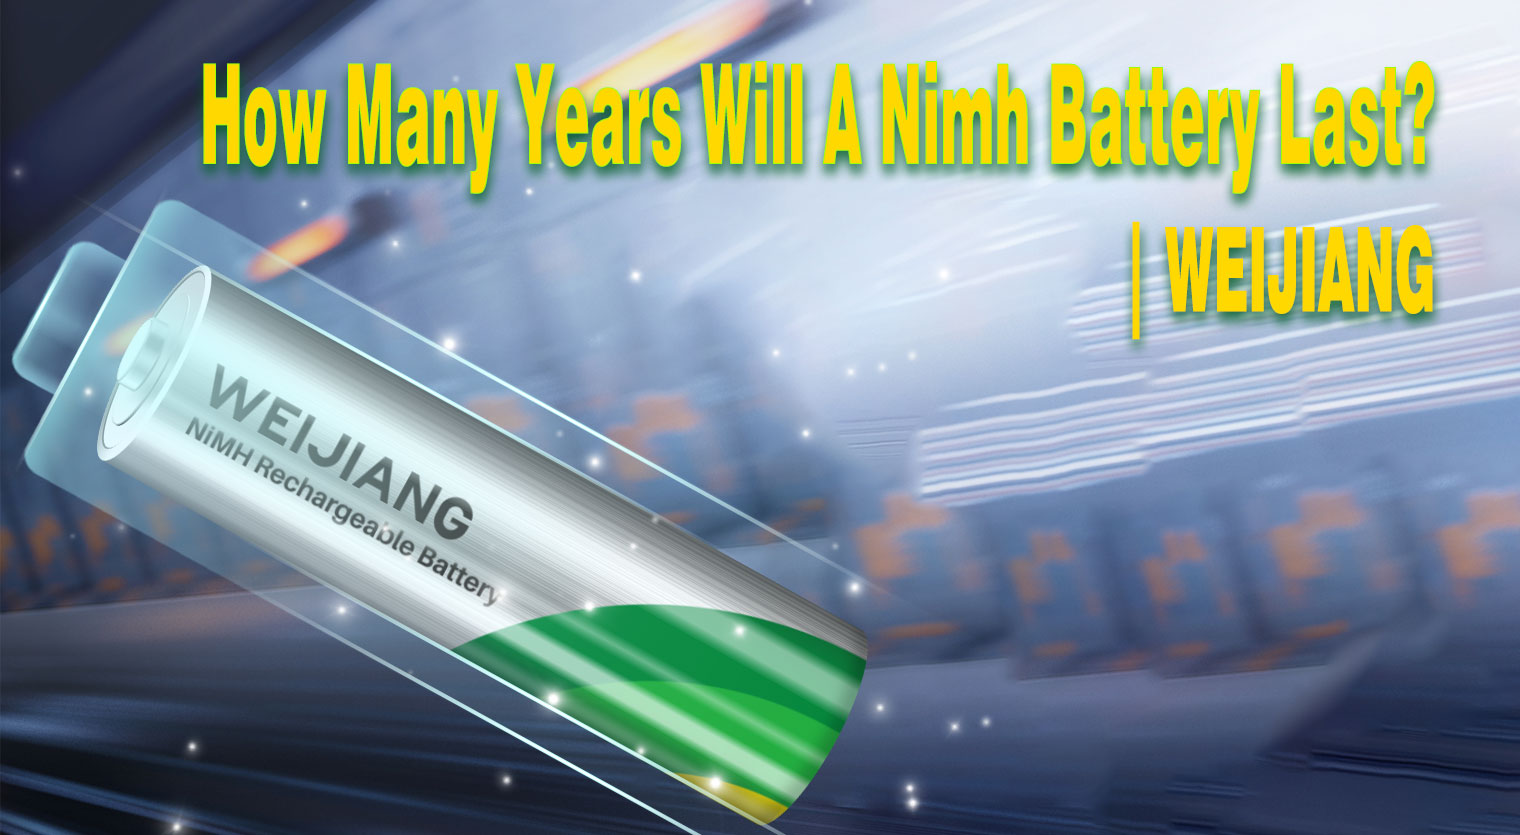 How Many Years Will A NIMH Battery Last?